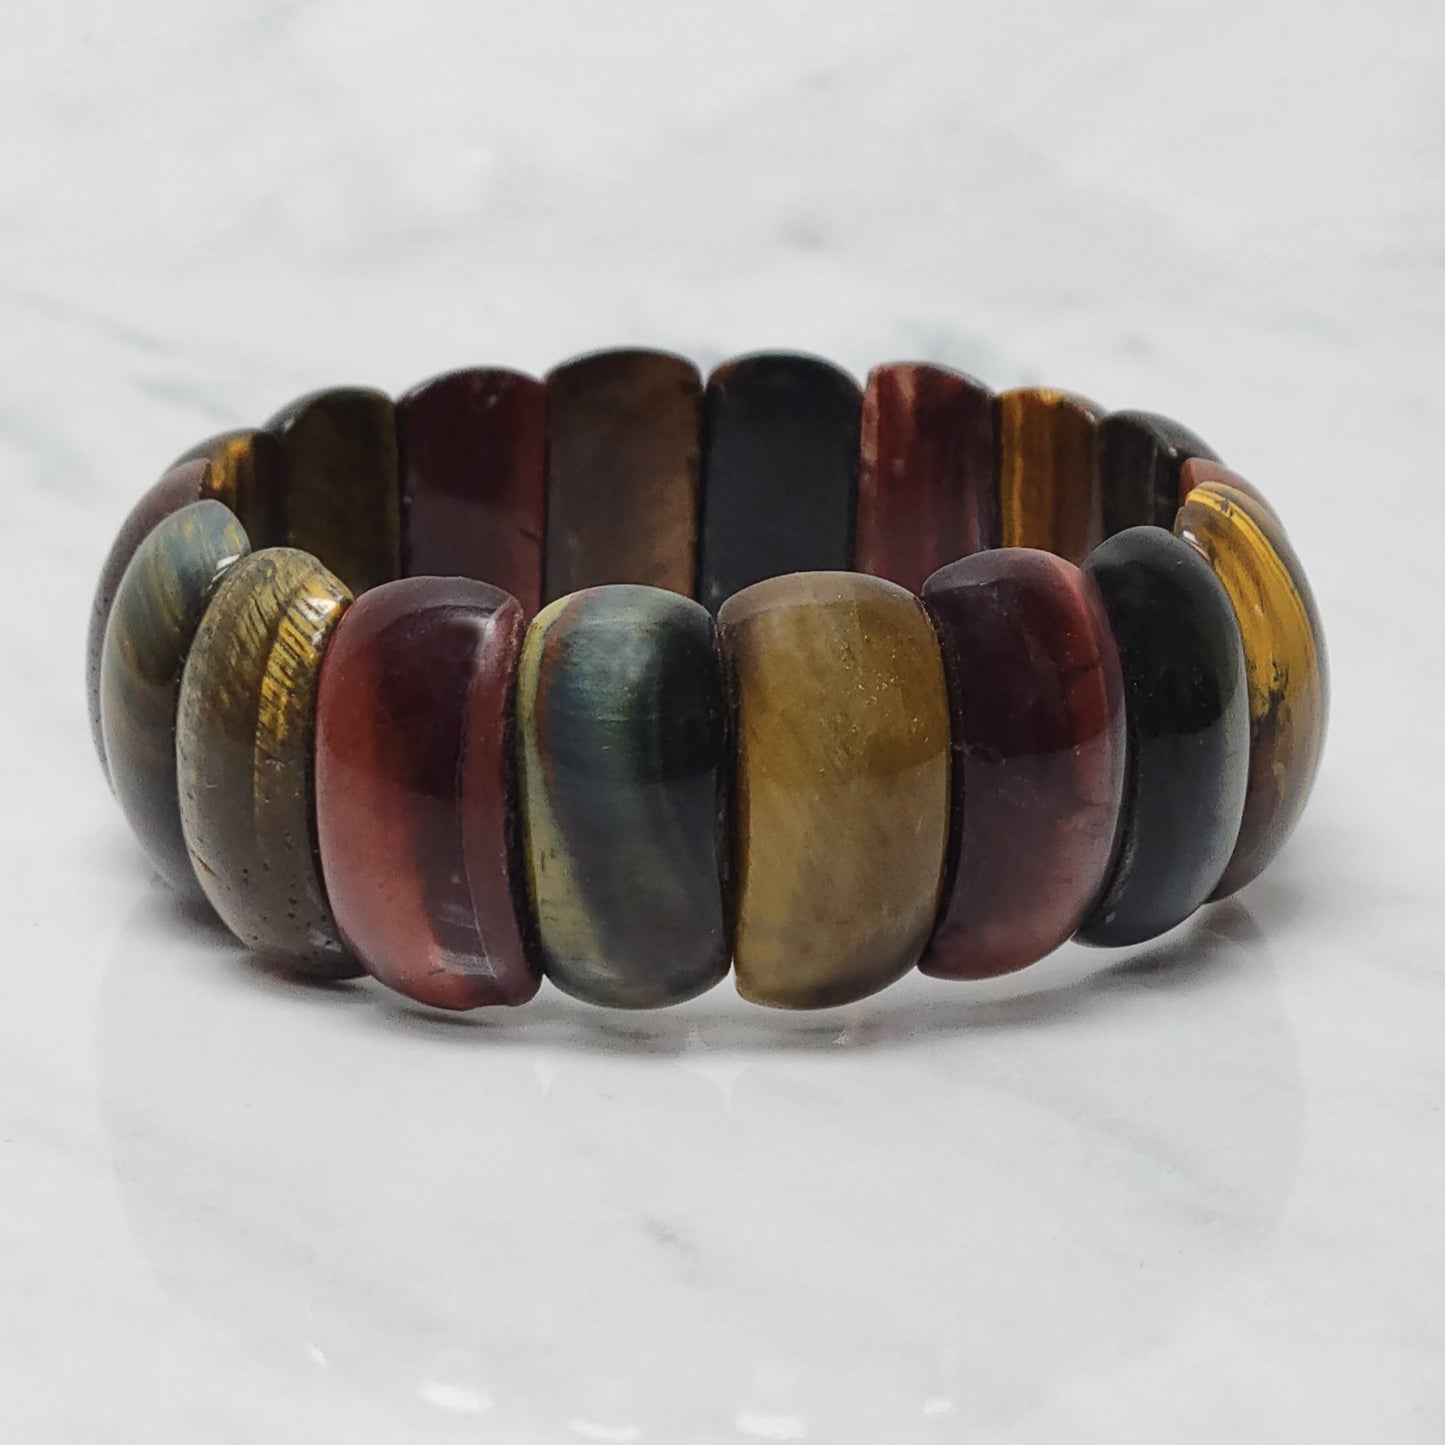 Tiger Eye (Yellow, Red, and Blue stones)- Resilience | Protection | Balance